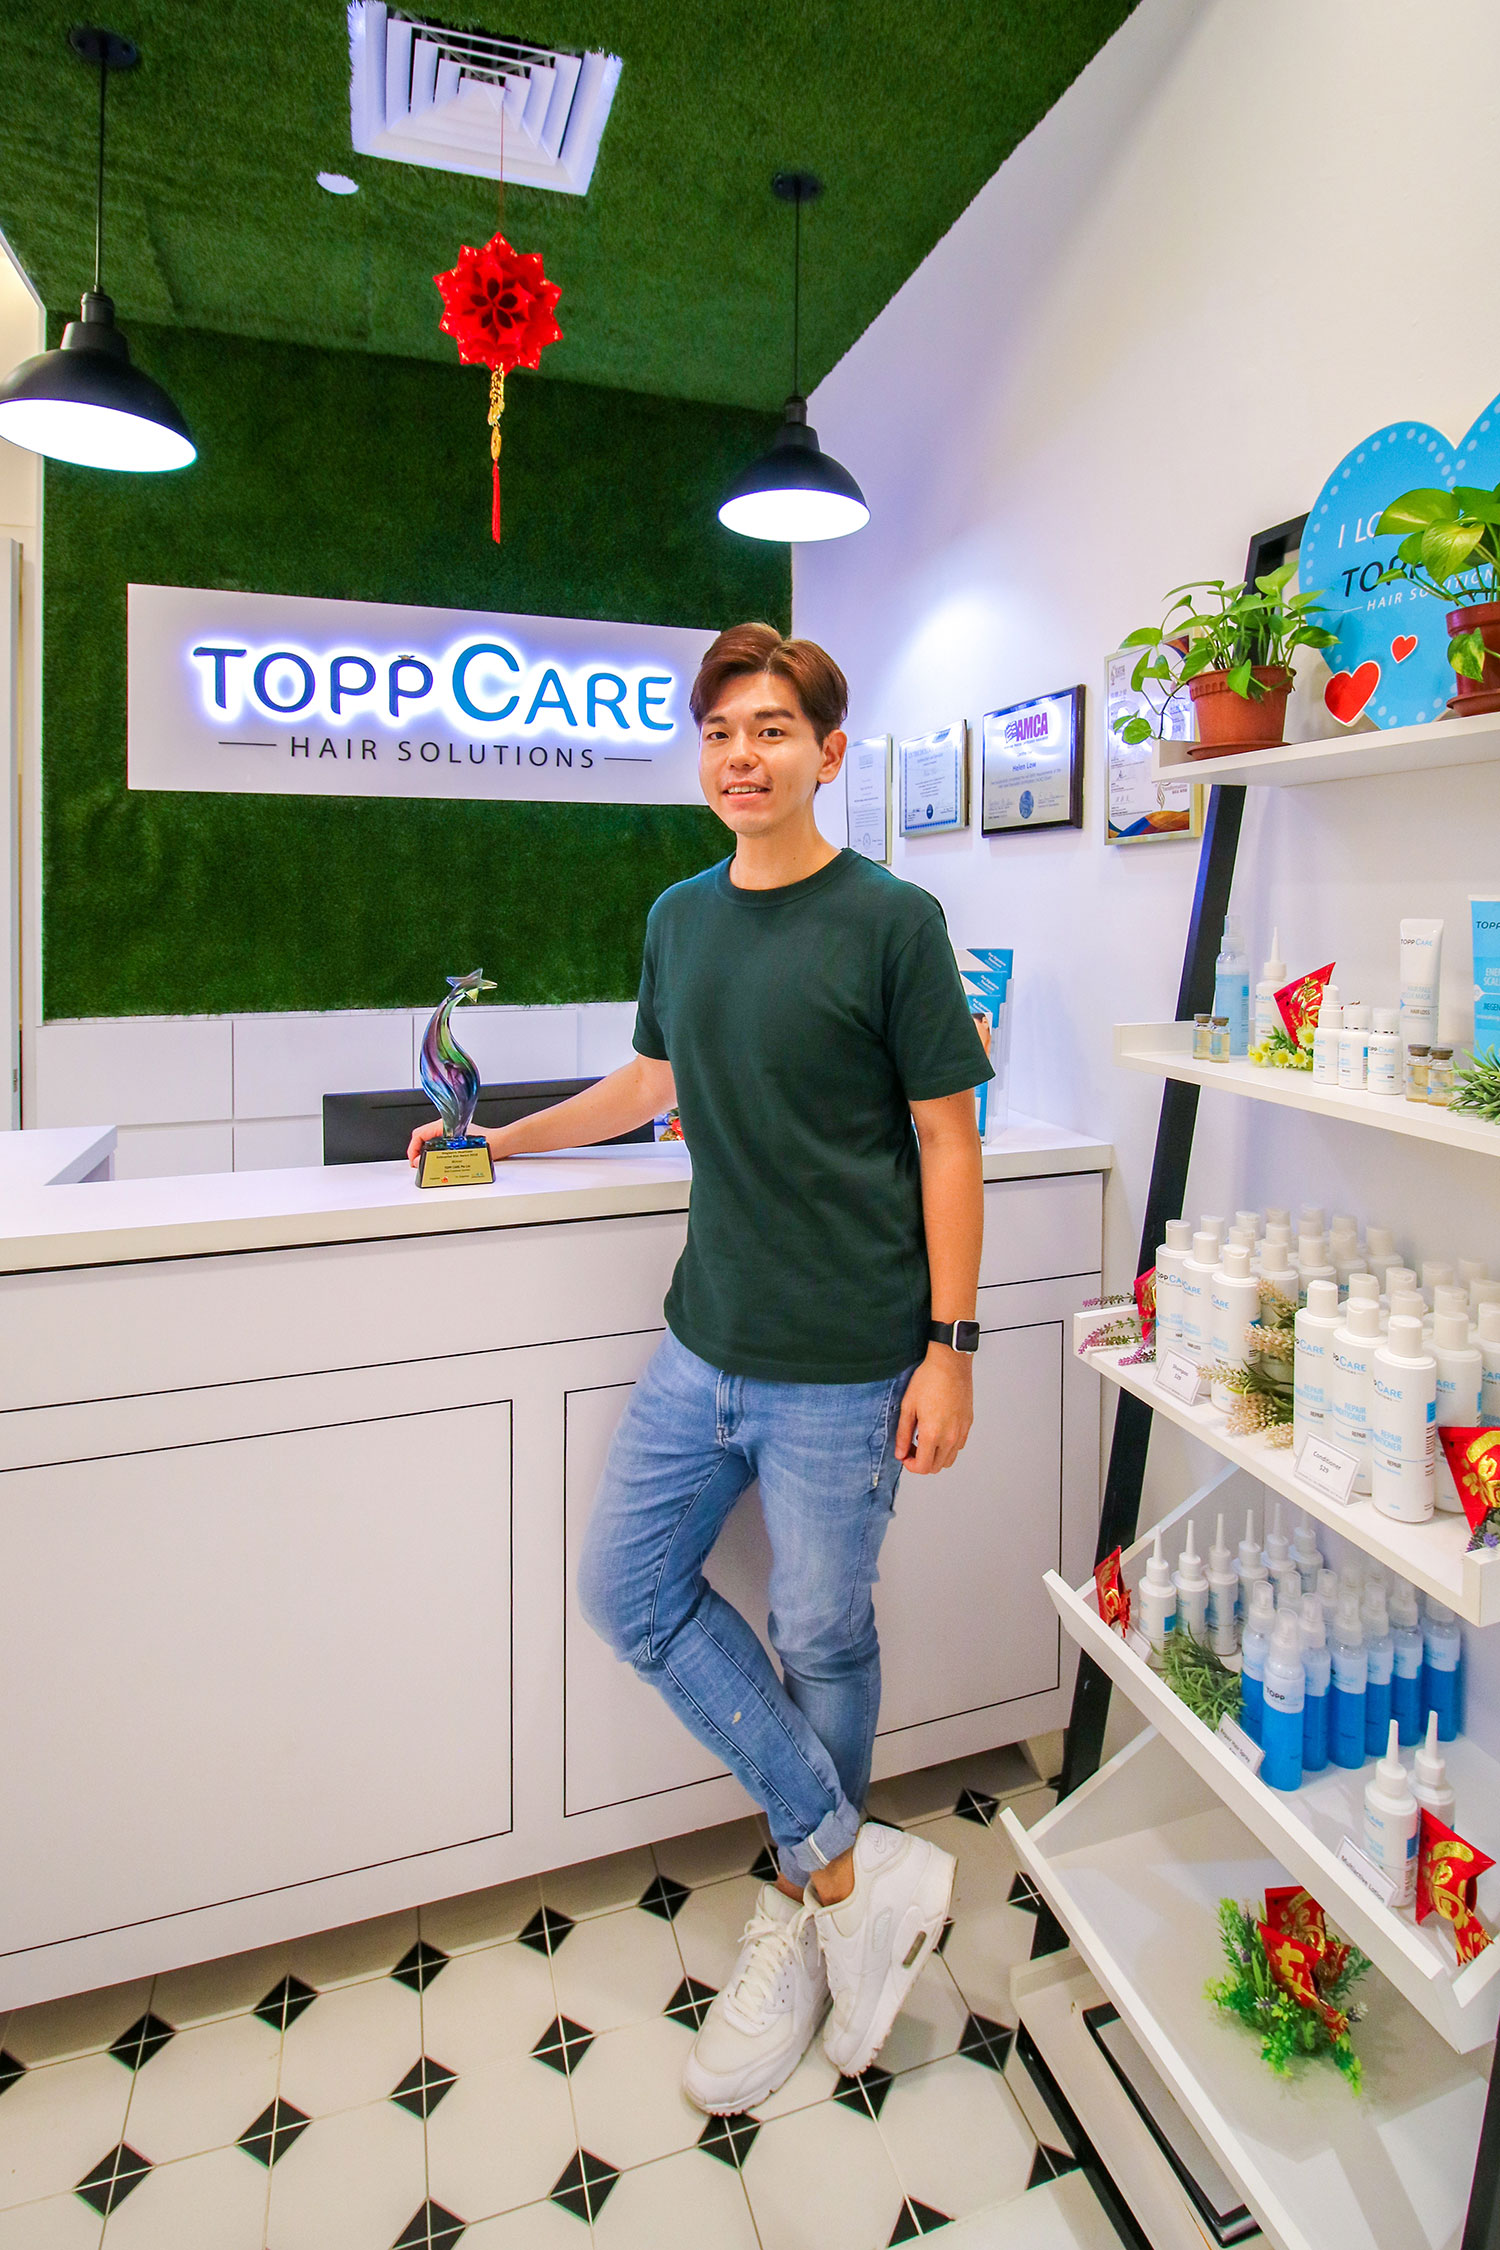 Toppcare-hair-solutions-darrenbloggie